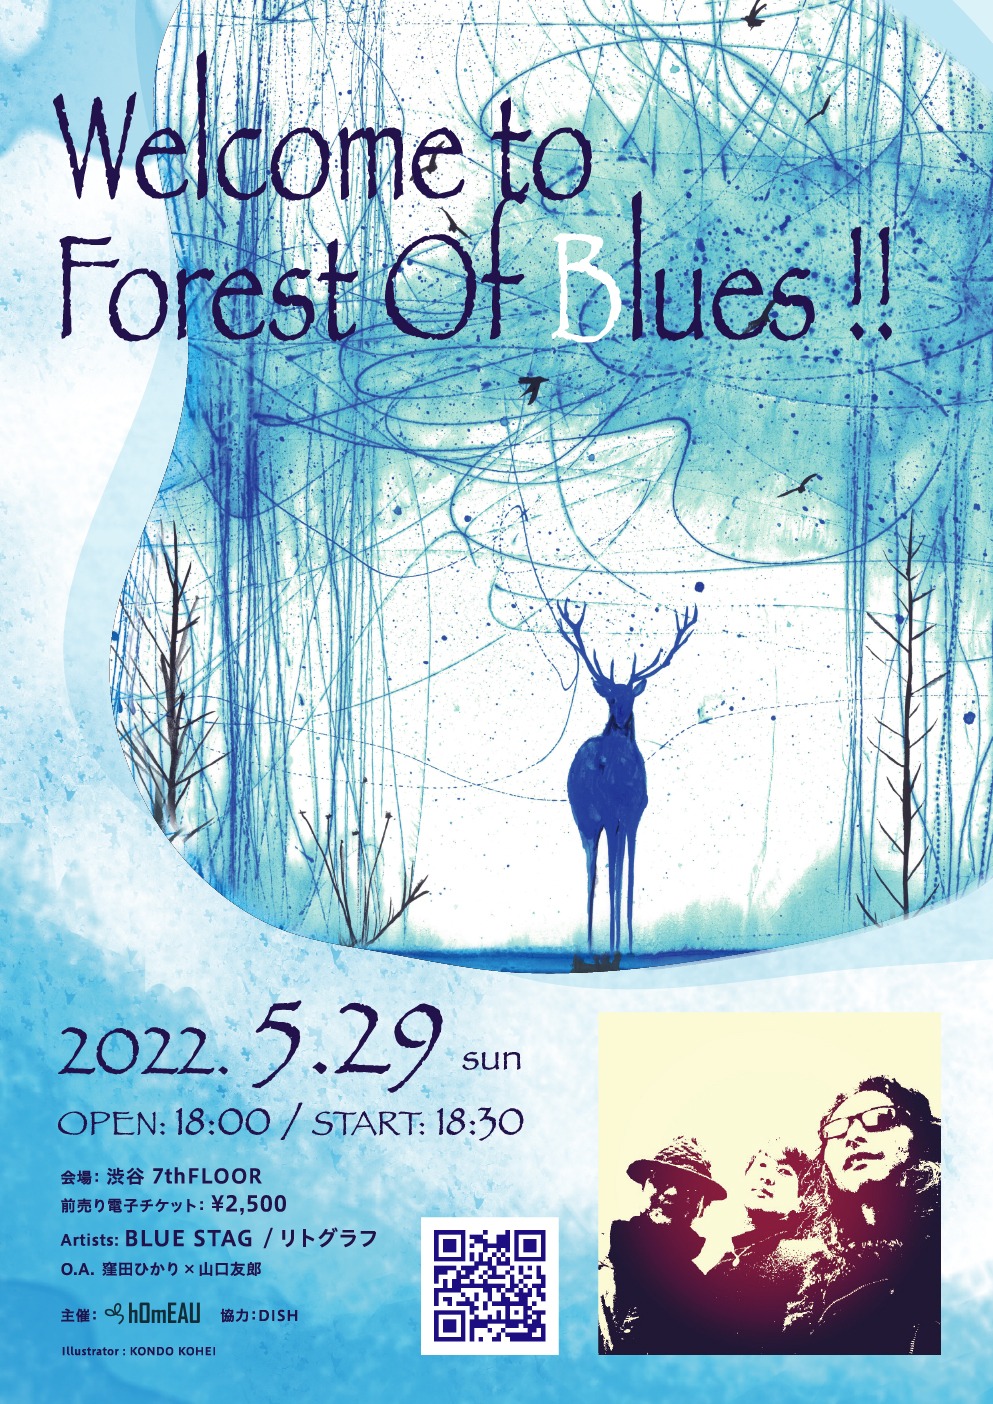 The Guitarist is Back!! Welcome to “Forest Of Blues”